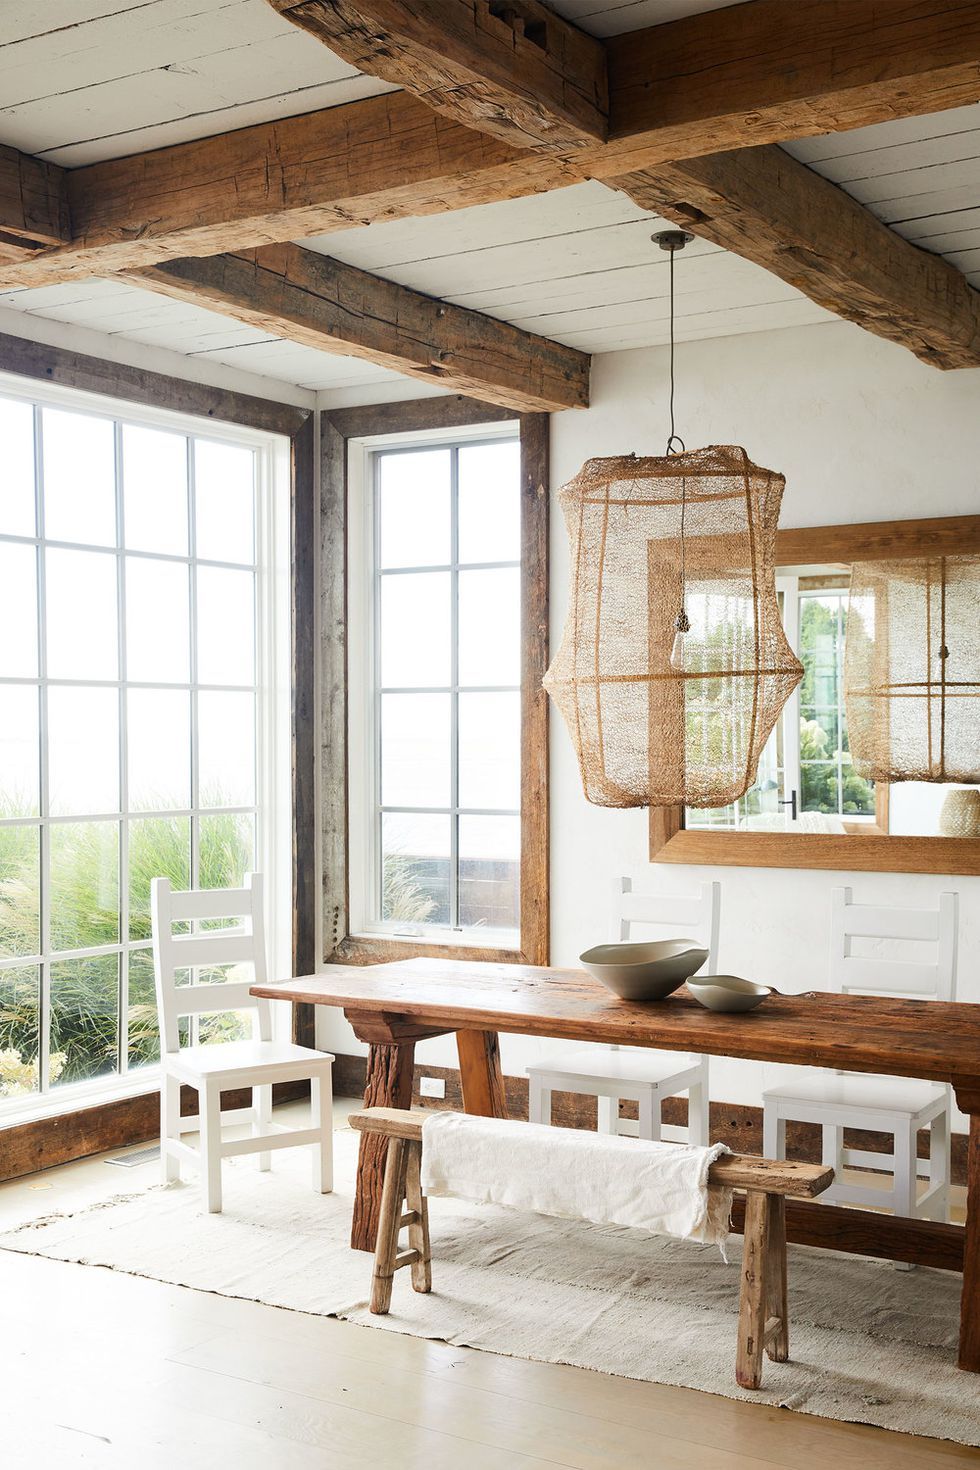 Everything You Need To Know About Rustic Design - What Is Rustic ...